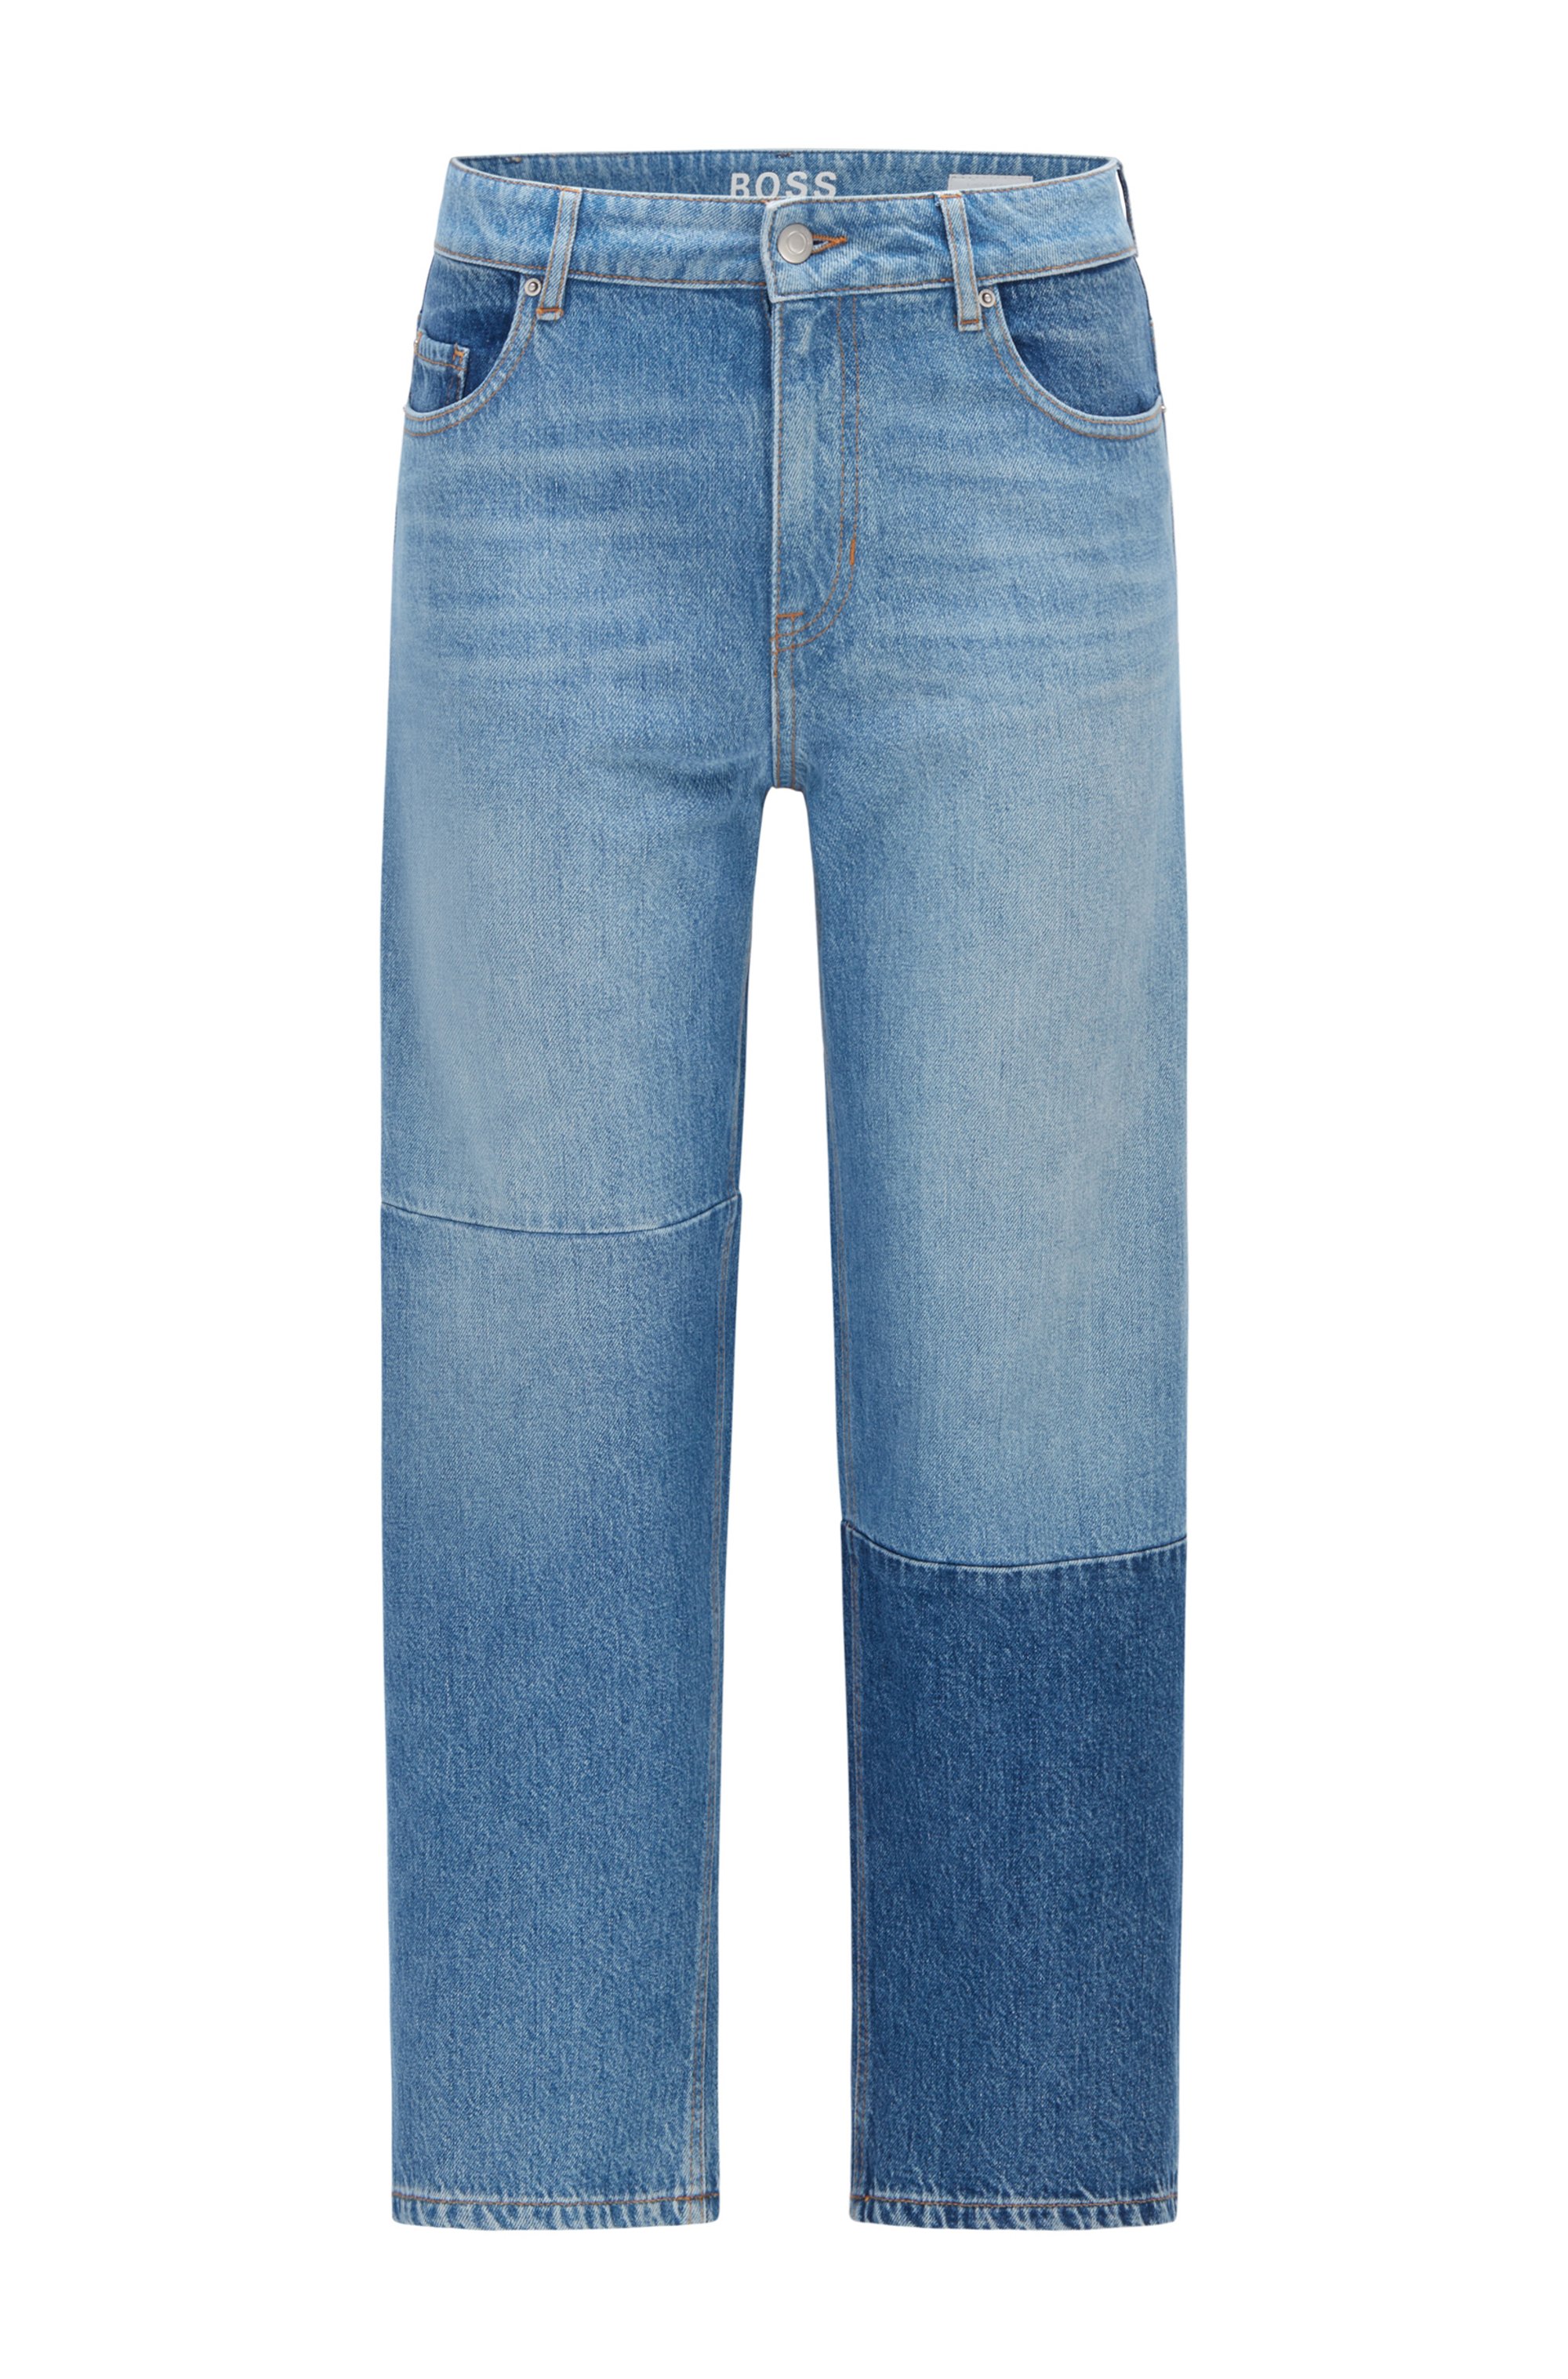 Regular-fit jeans in patched Italian denim, Blue